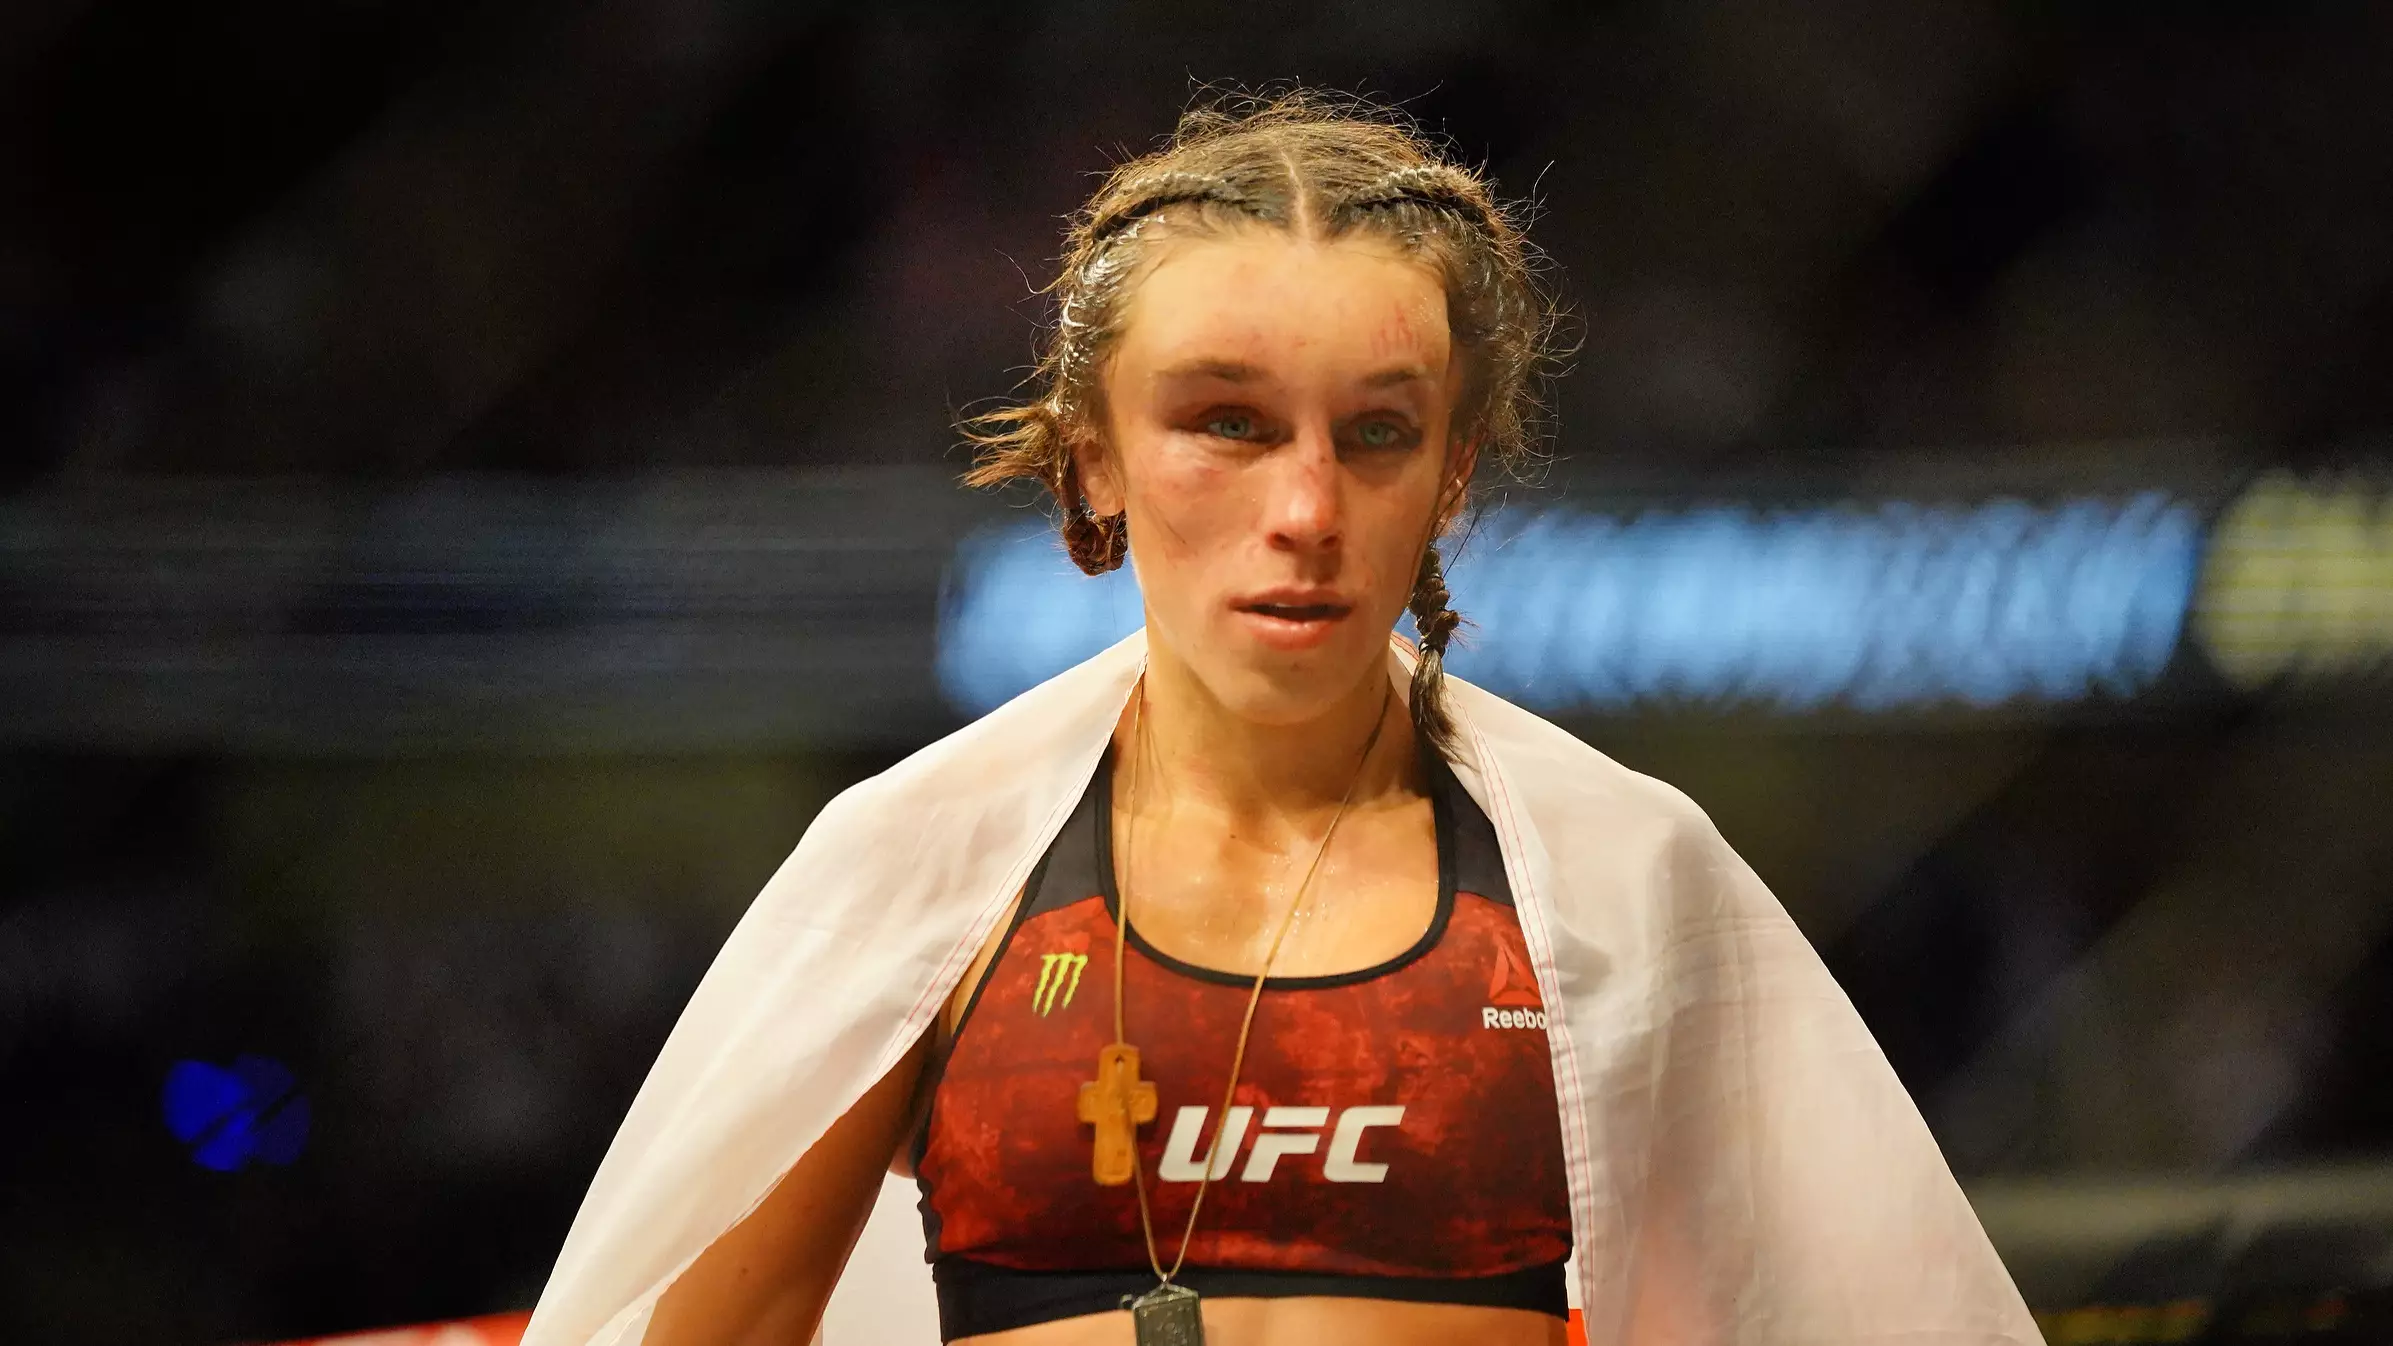 Joanna Jedrzejczyk Shows Off Her Badly Bruised Face In Video 